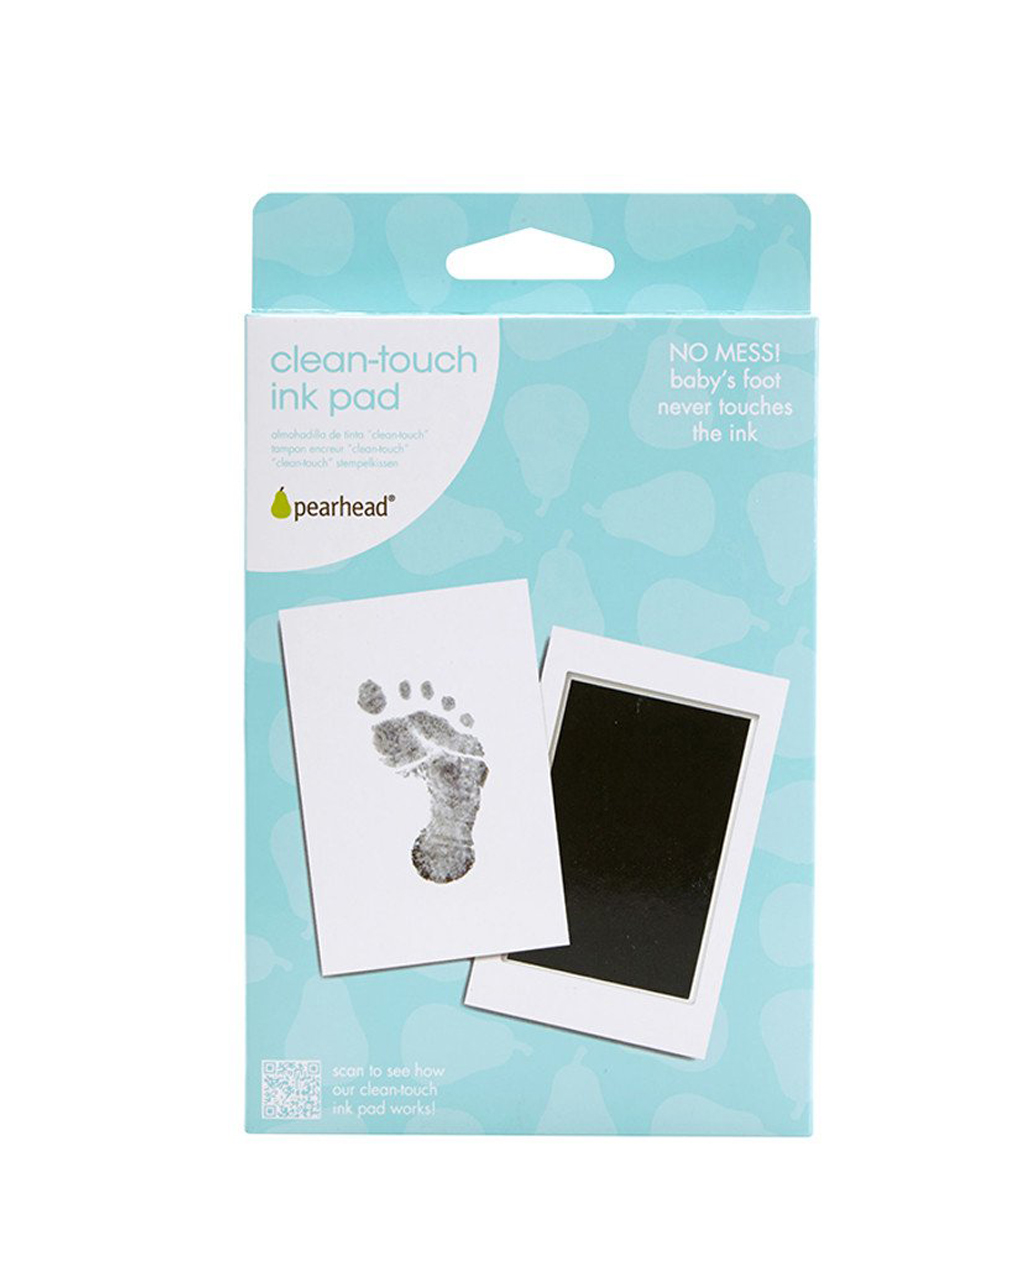 Clean-touch ink pad black - Pearhead